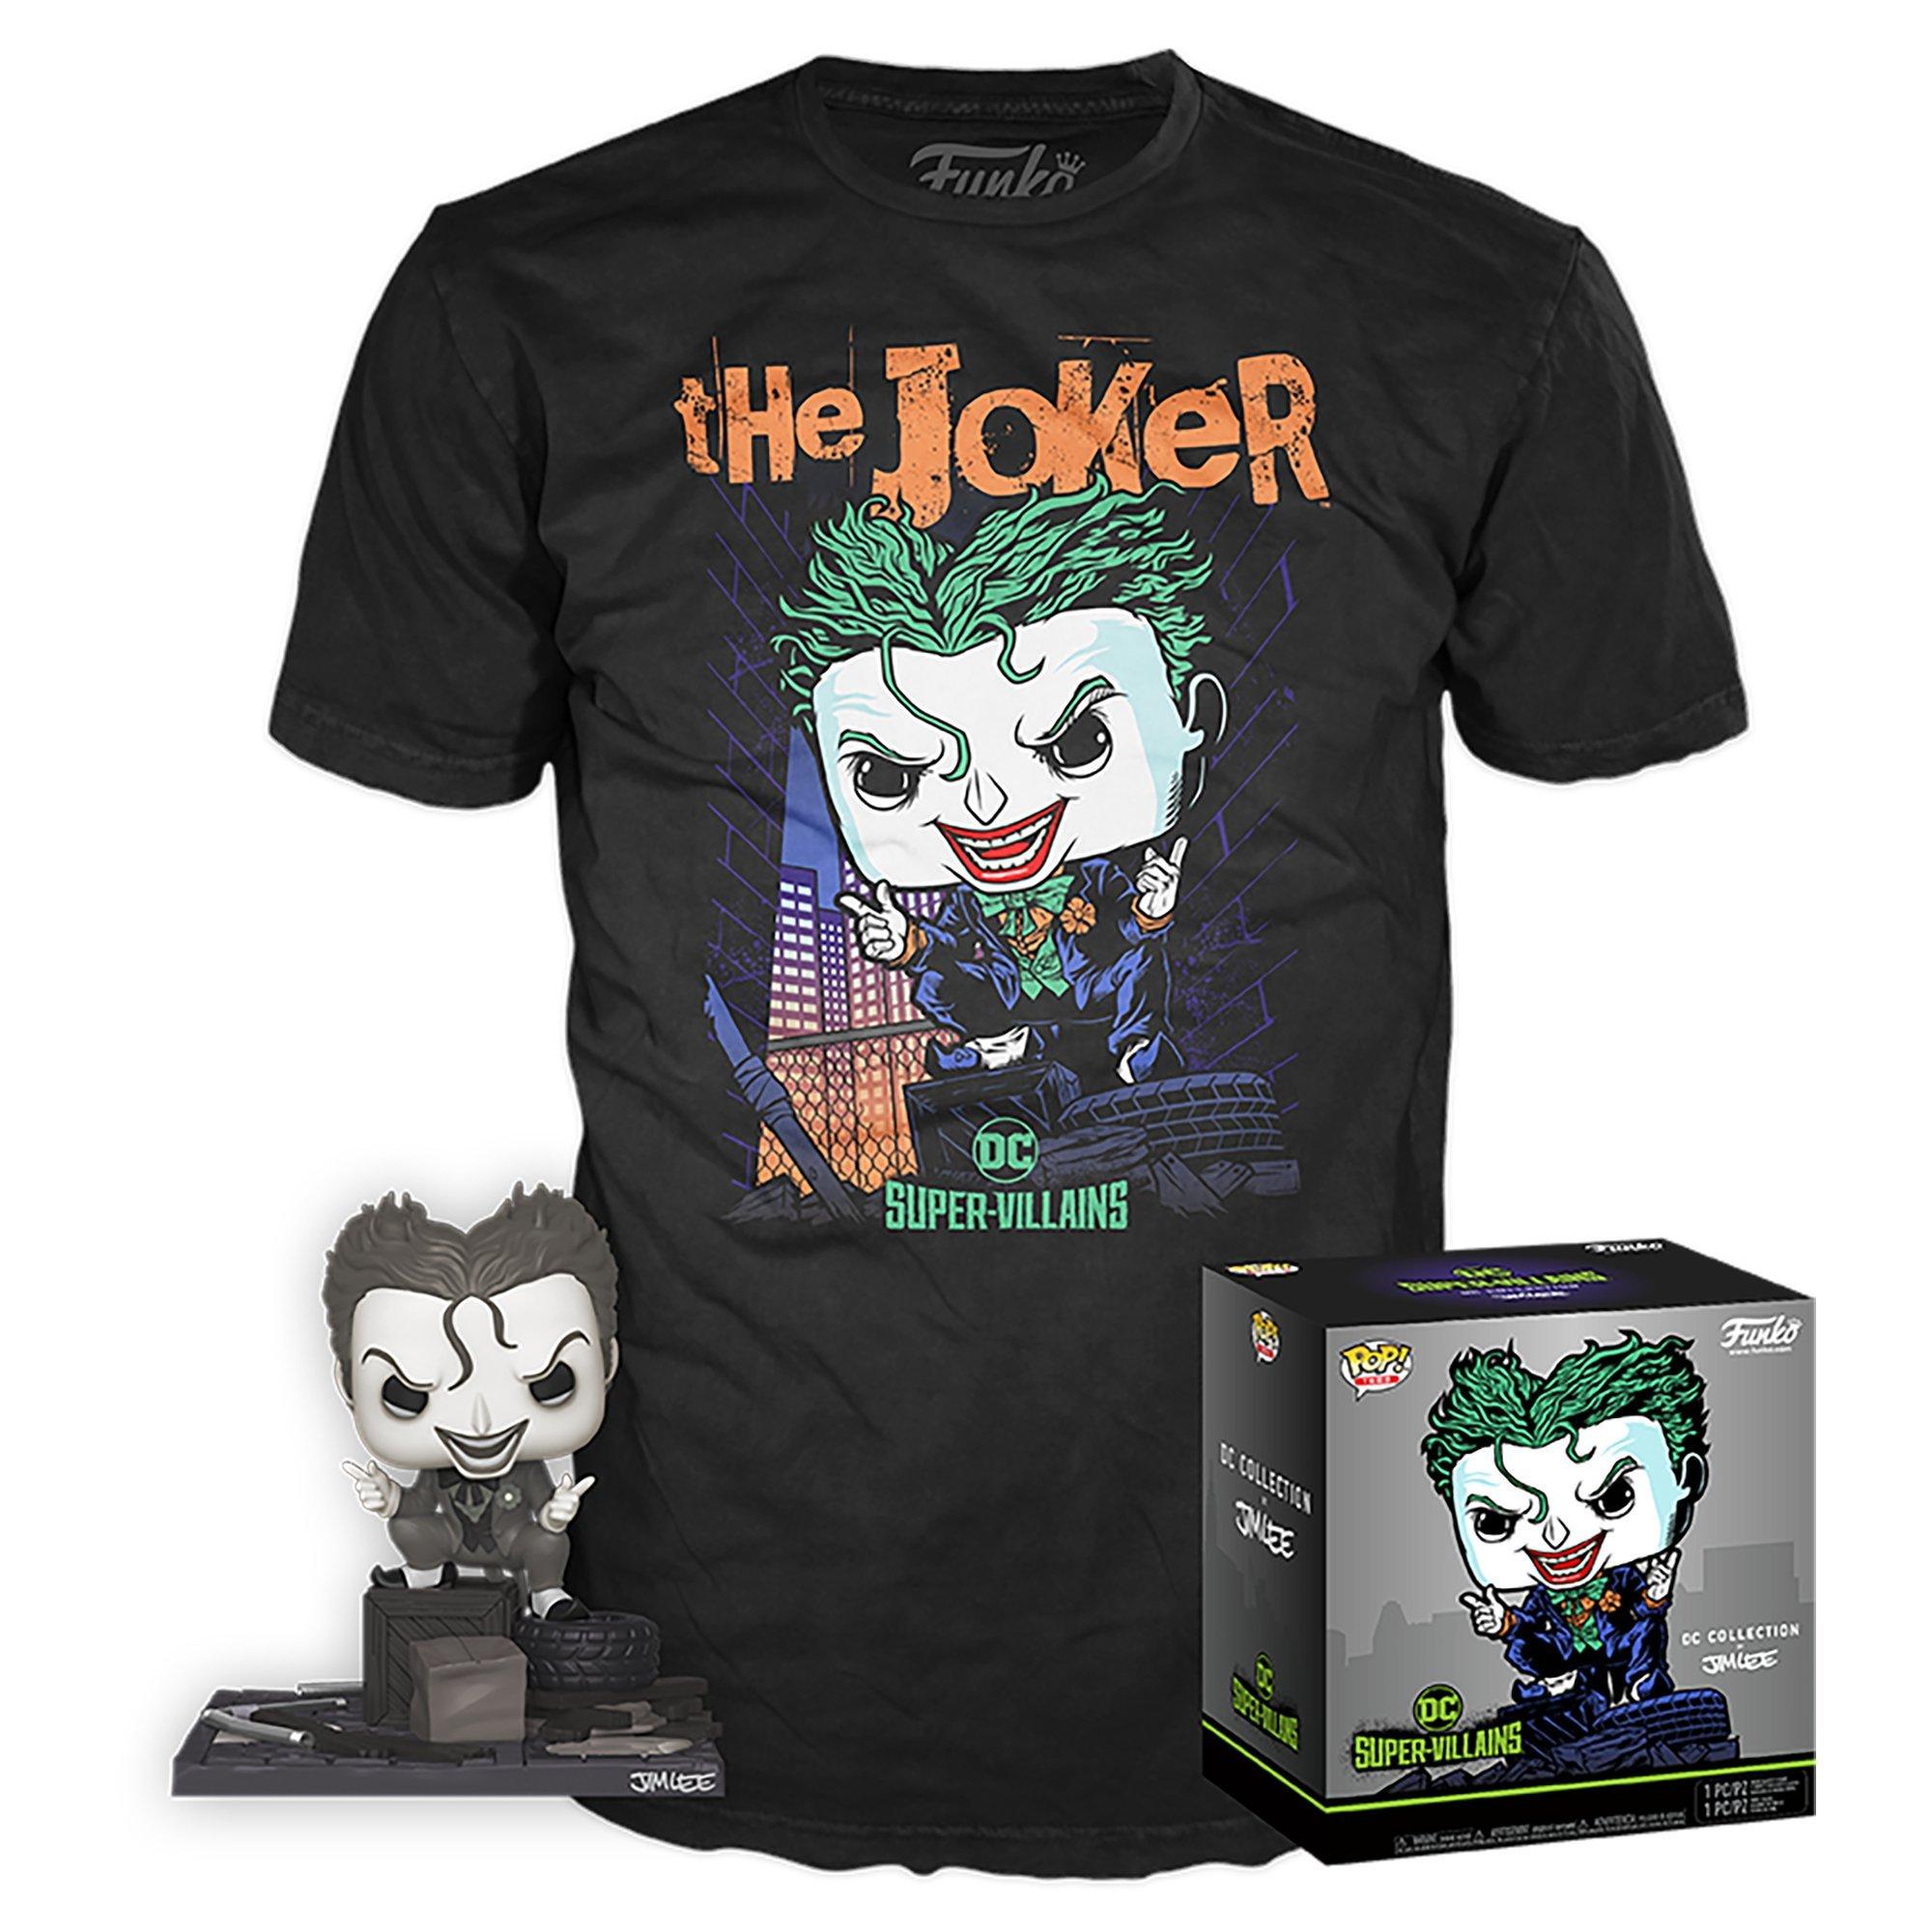 POP! and Tee: The Joker by Jim Lee T-Shirt